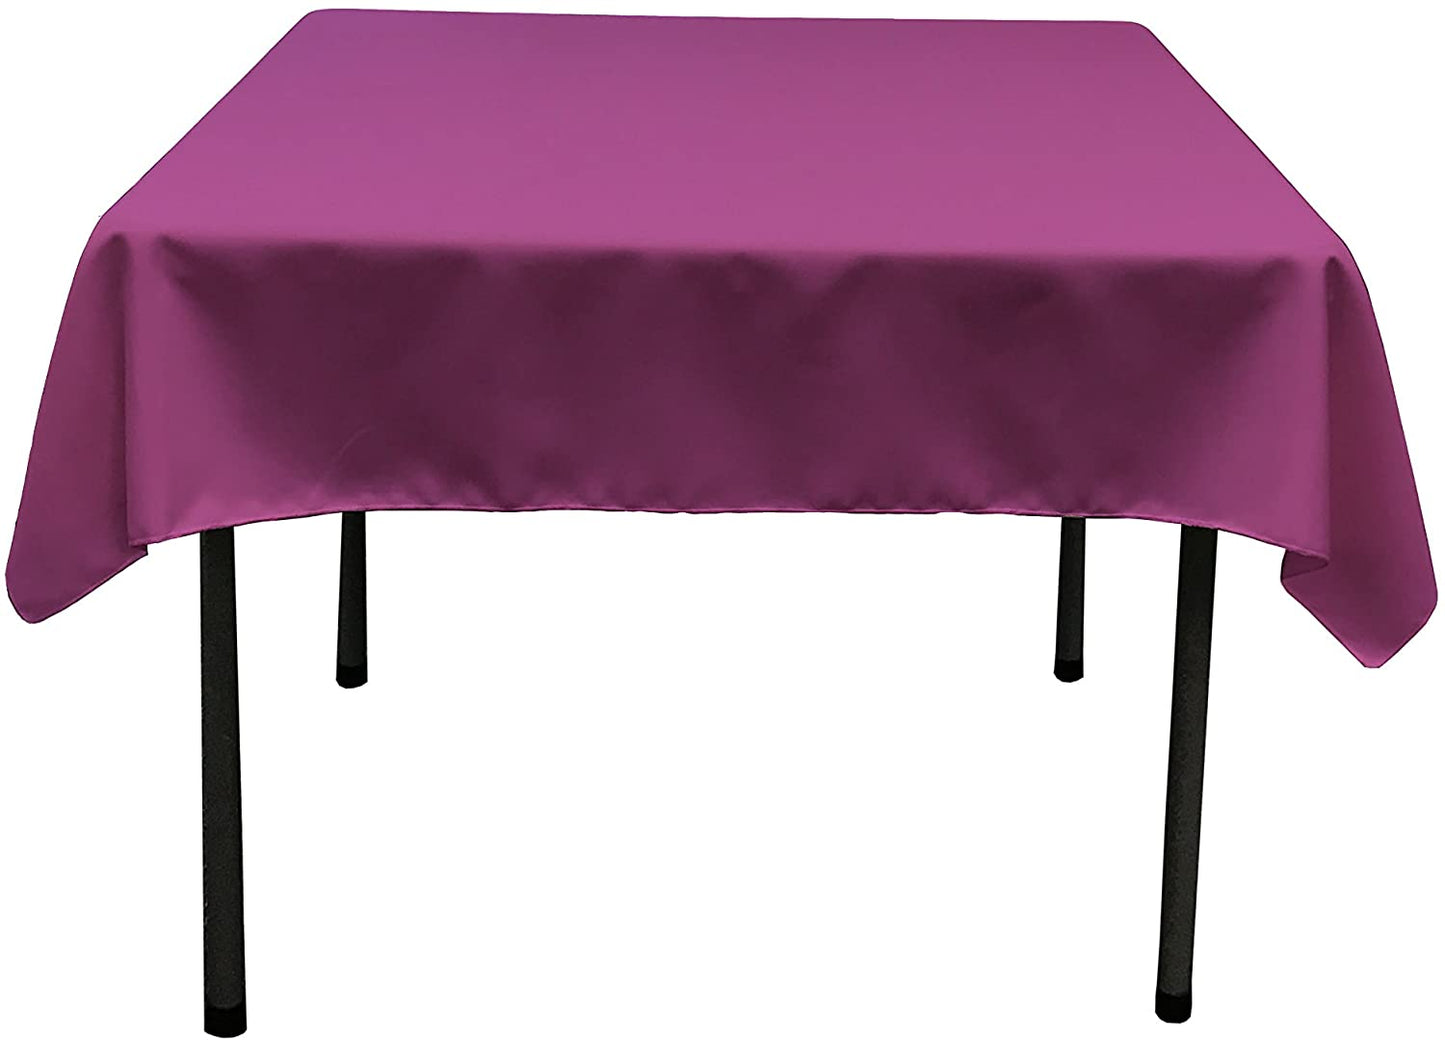 Polyester Poplin Washable Square Tablecloth, Stain and Wrinkle Resistant Table Cover Magenta